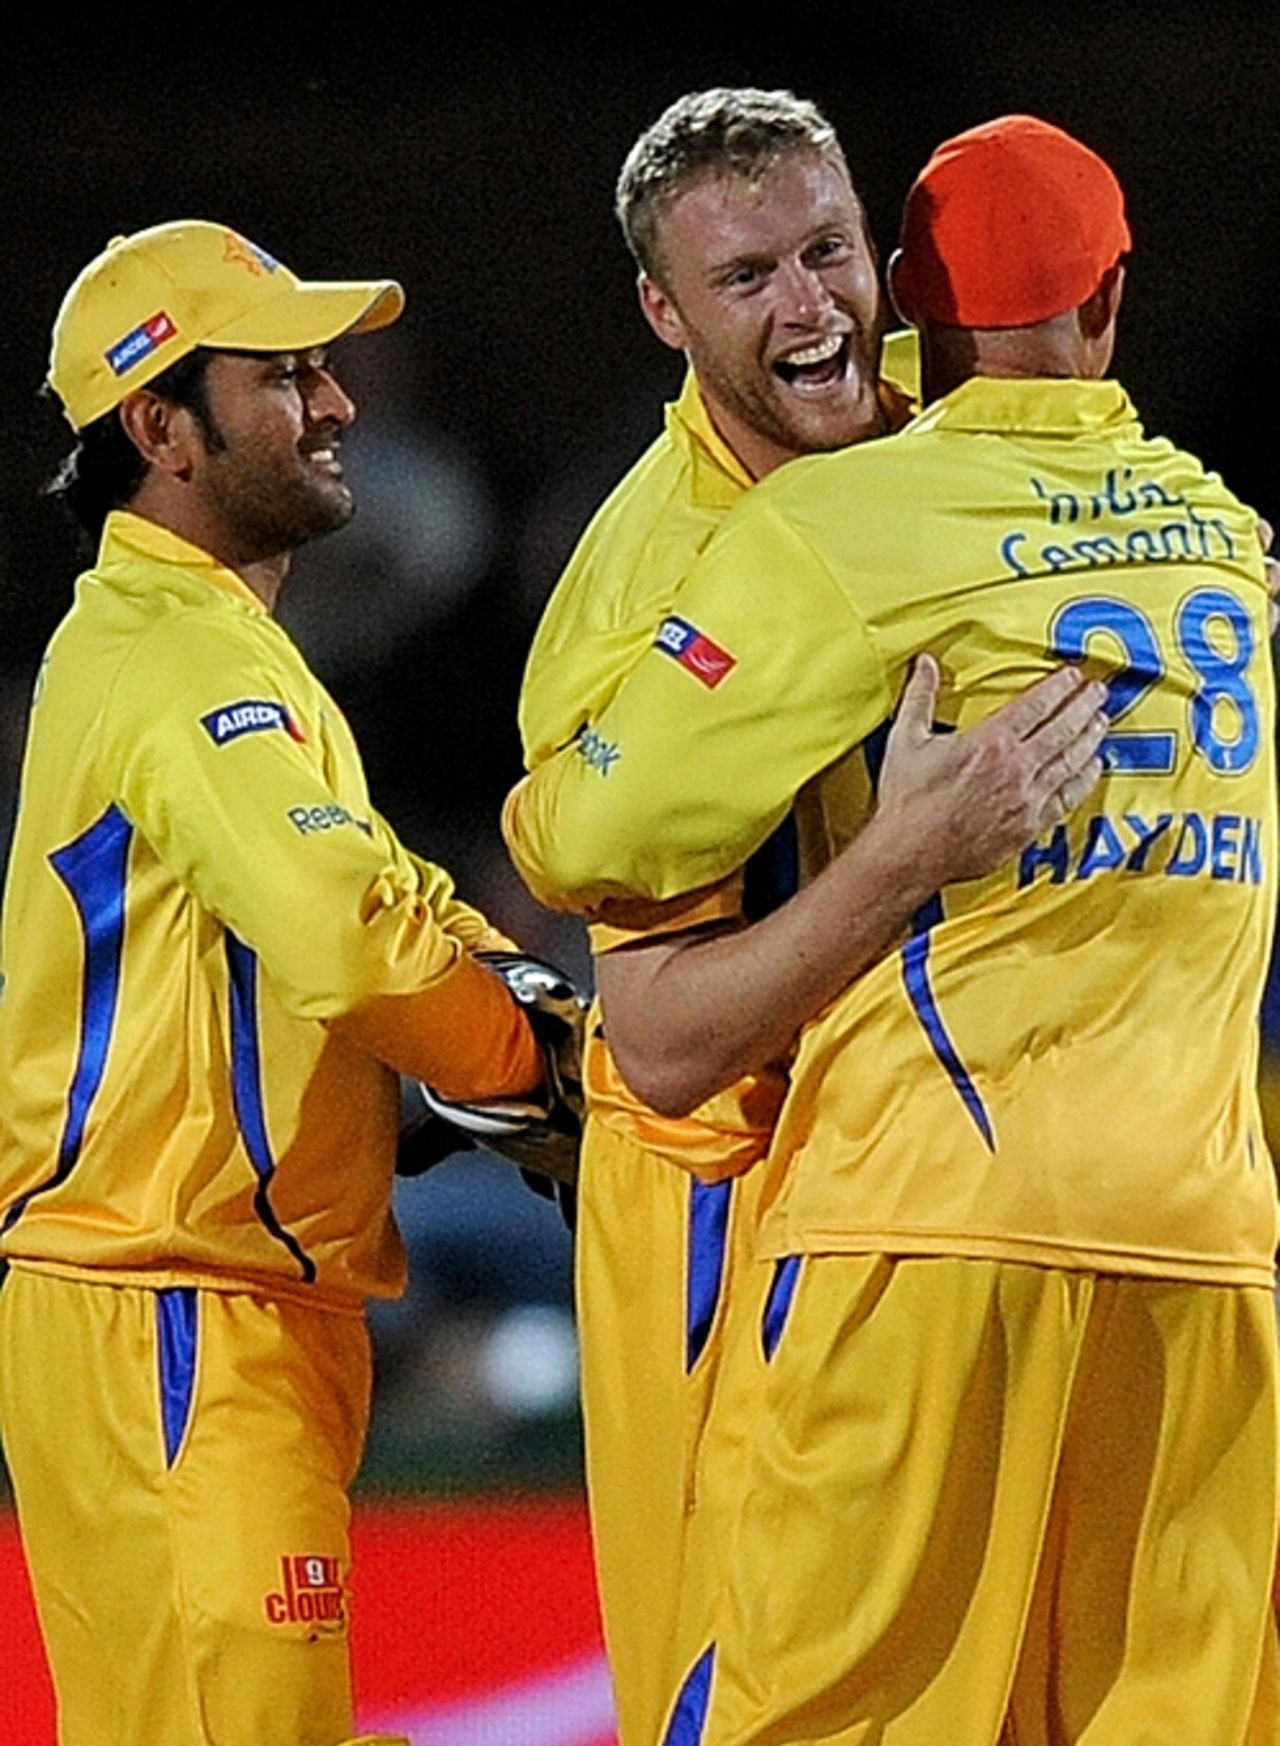 Andrew Flintoff gets the congratulations after removing Ross Taylor, Bangalore Royal Challengers v Chennai Super Kings, IPL, 5th game, Port Elizabeth, April 20, 2009